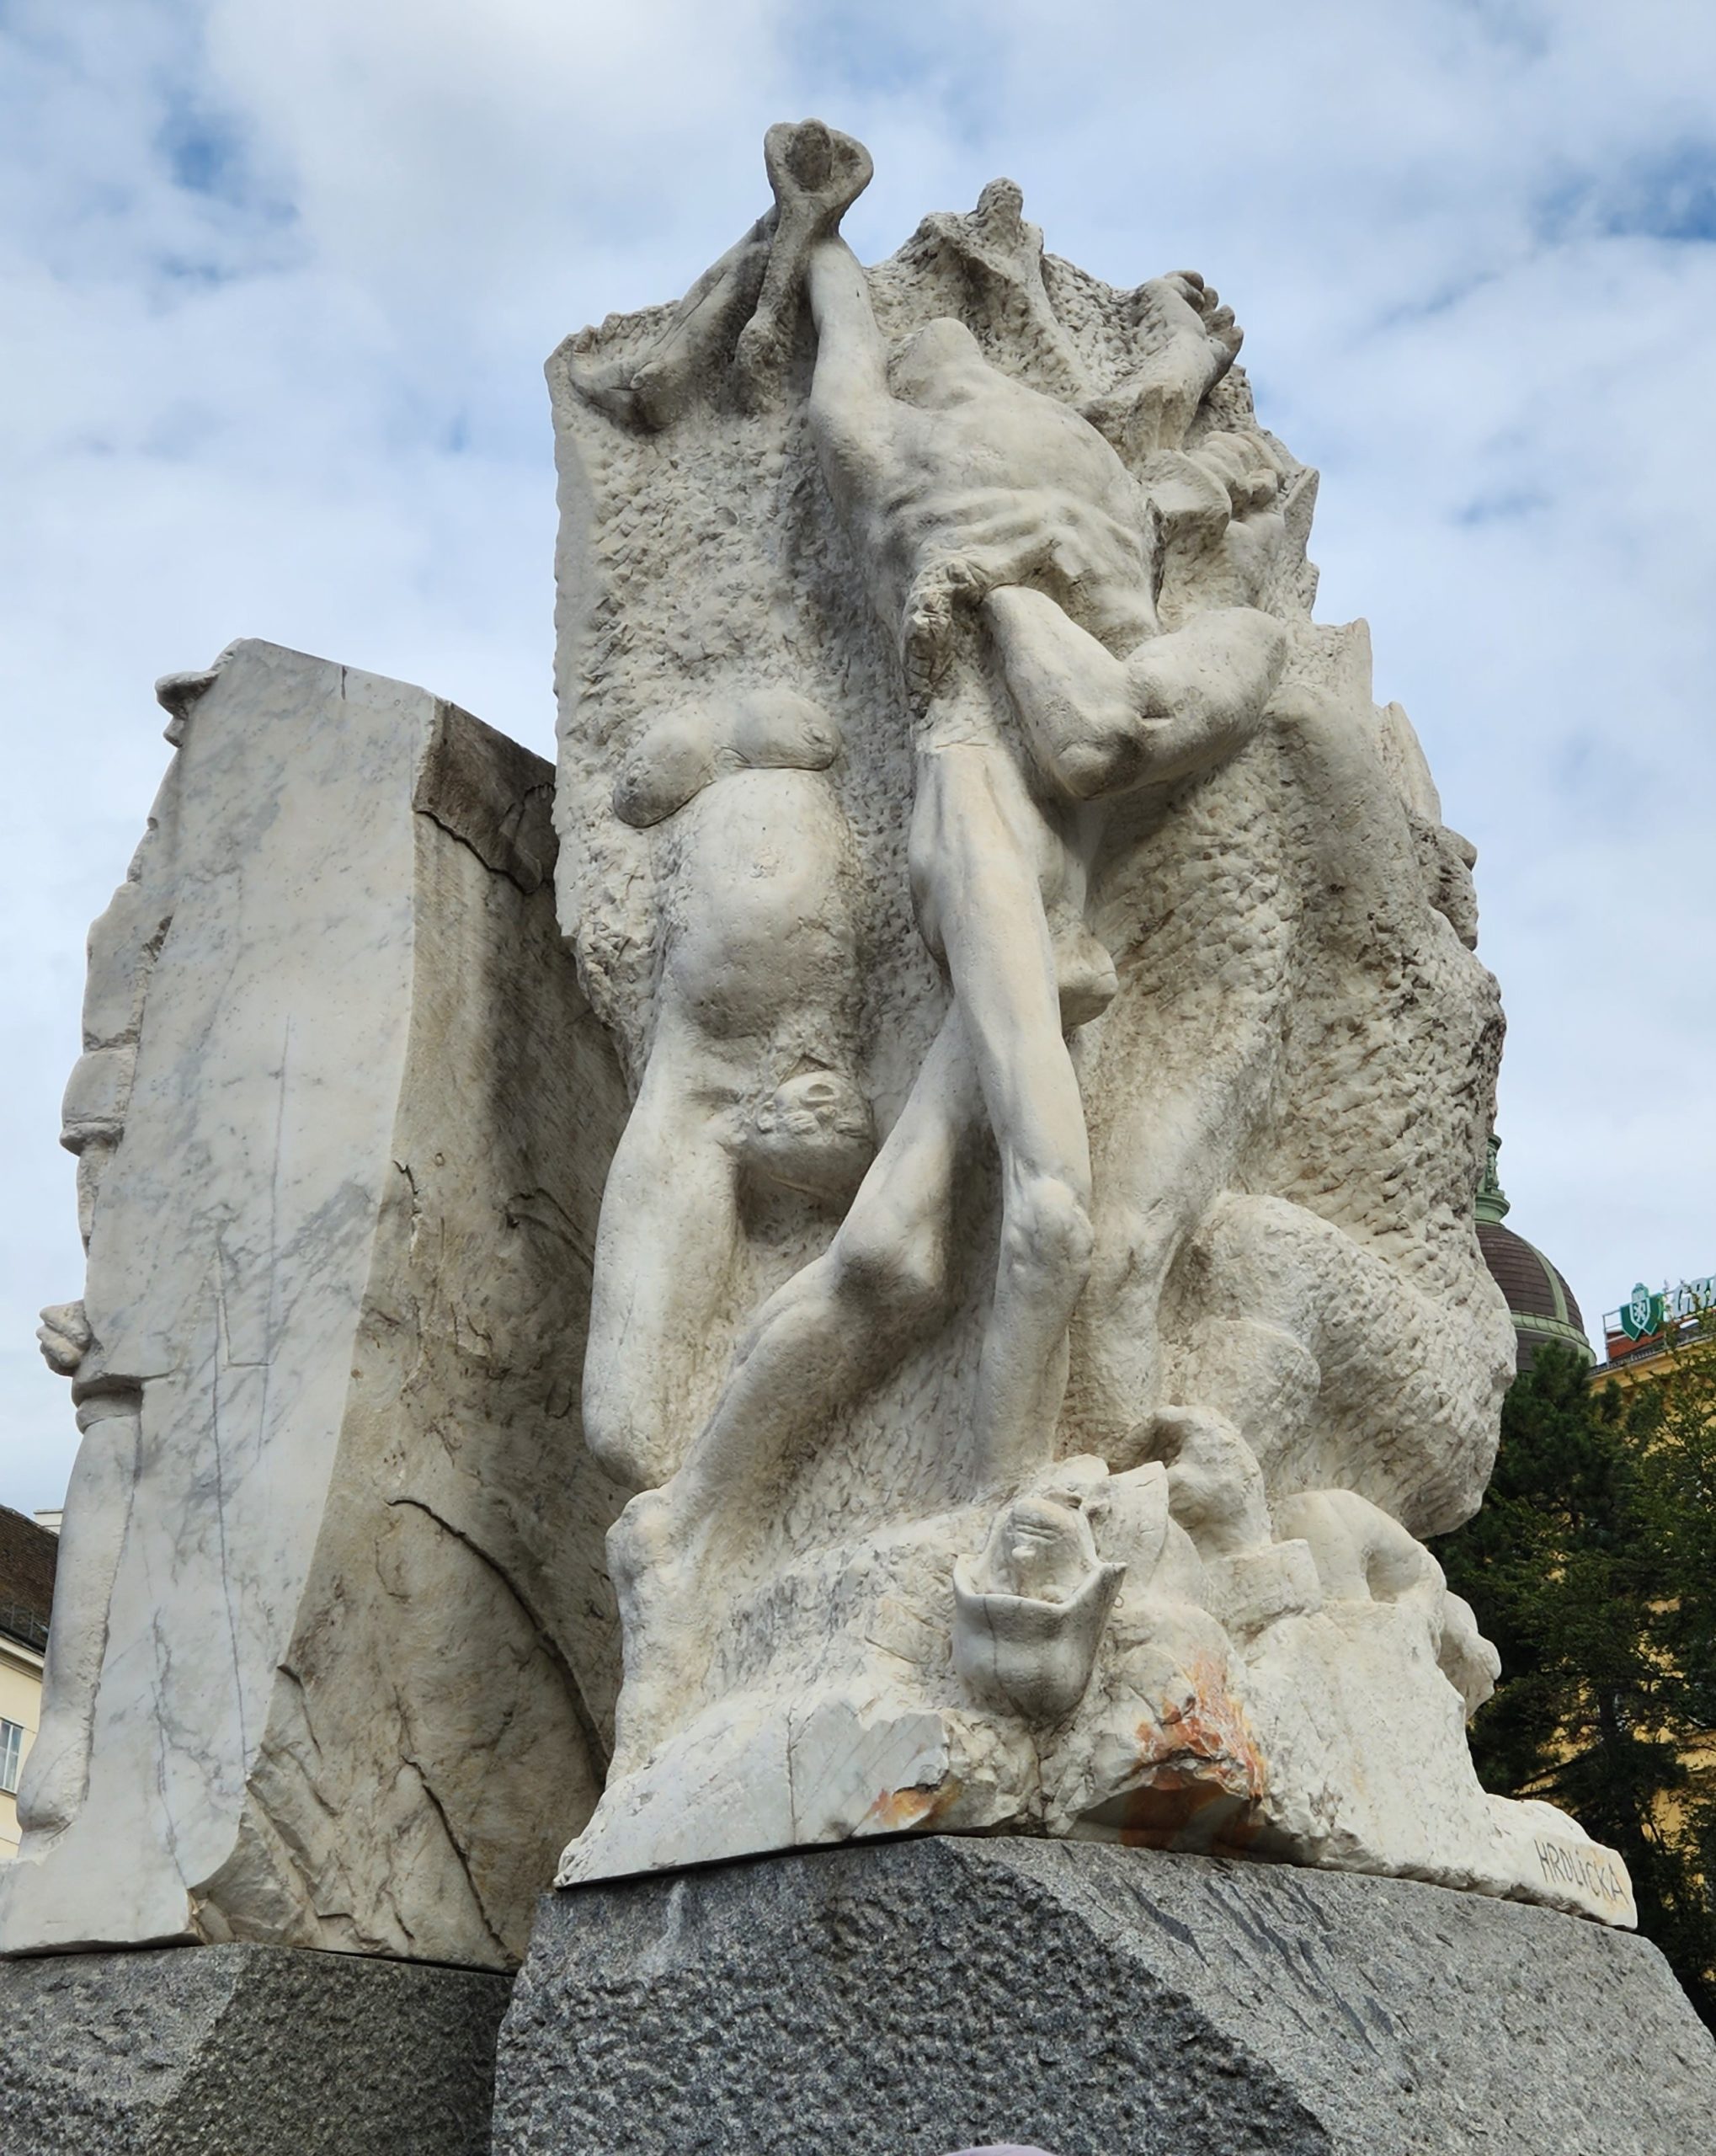 A section of the “Gate of Violence” in the Monument against War and Fascism by Alfred Hrdlicka